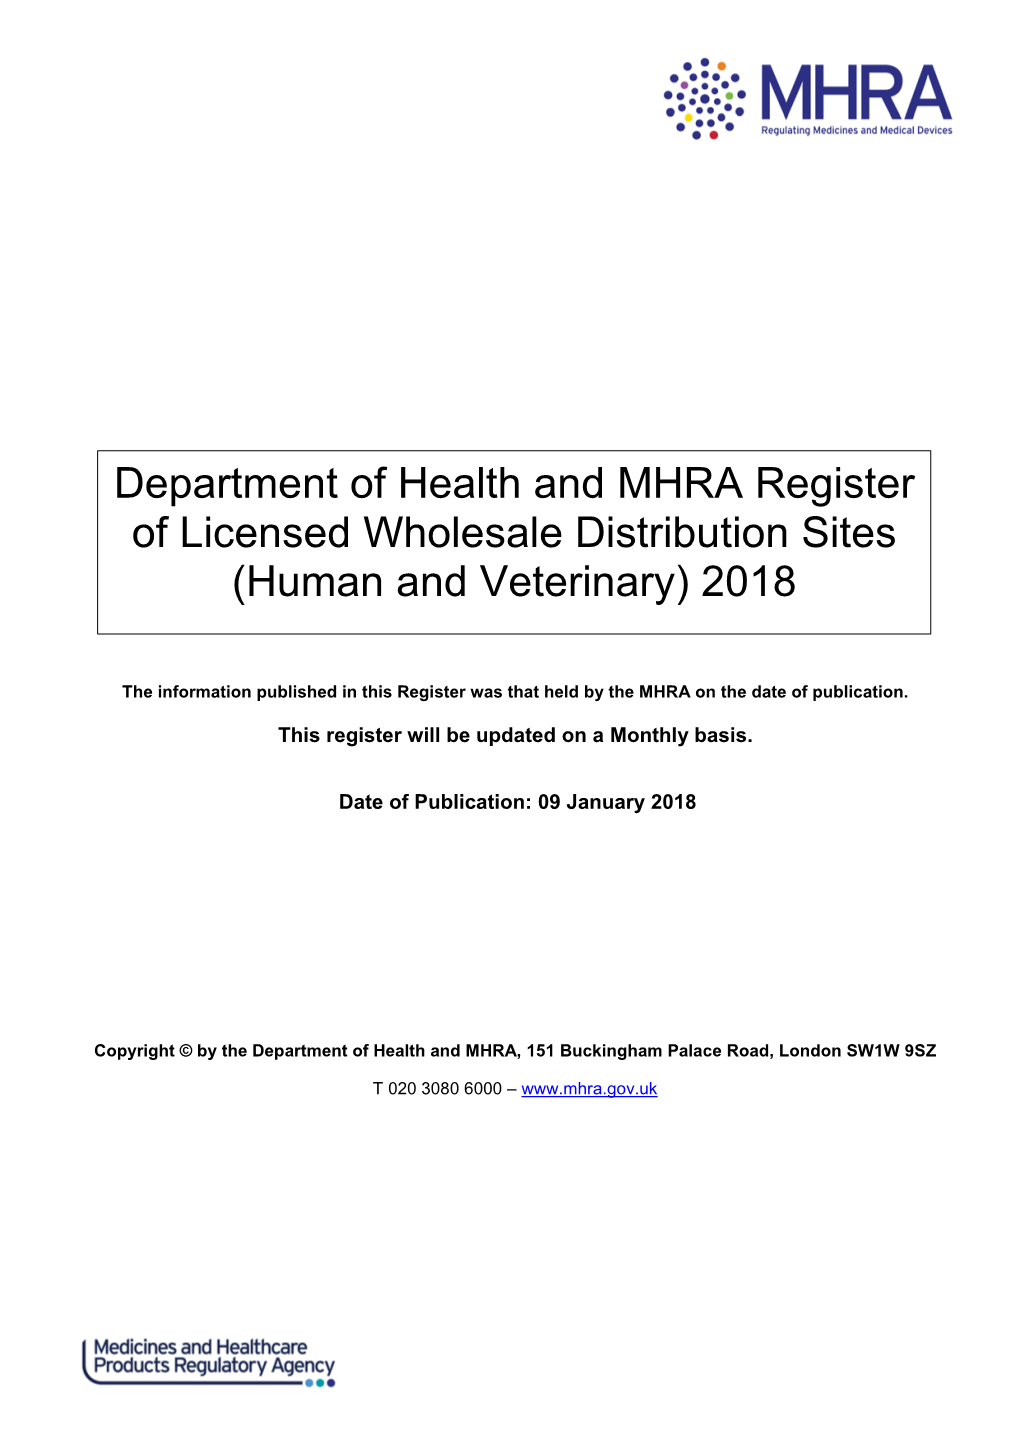 Department of Health and MHRA Register of Licensed Wholesale Distribution Sites (Human and Veterinary) 2018